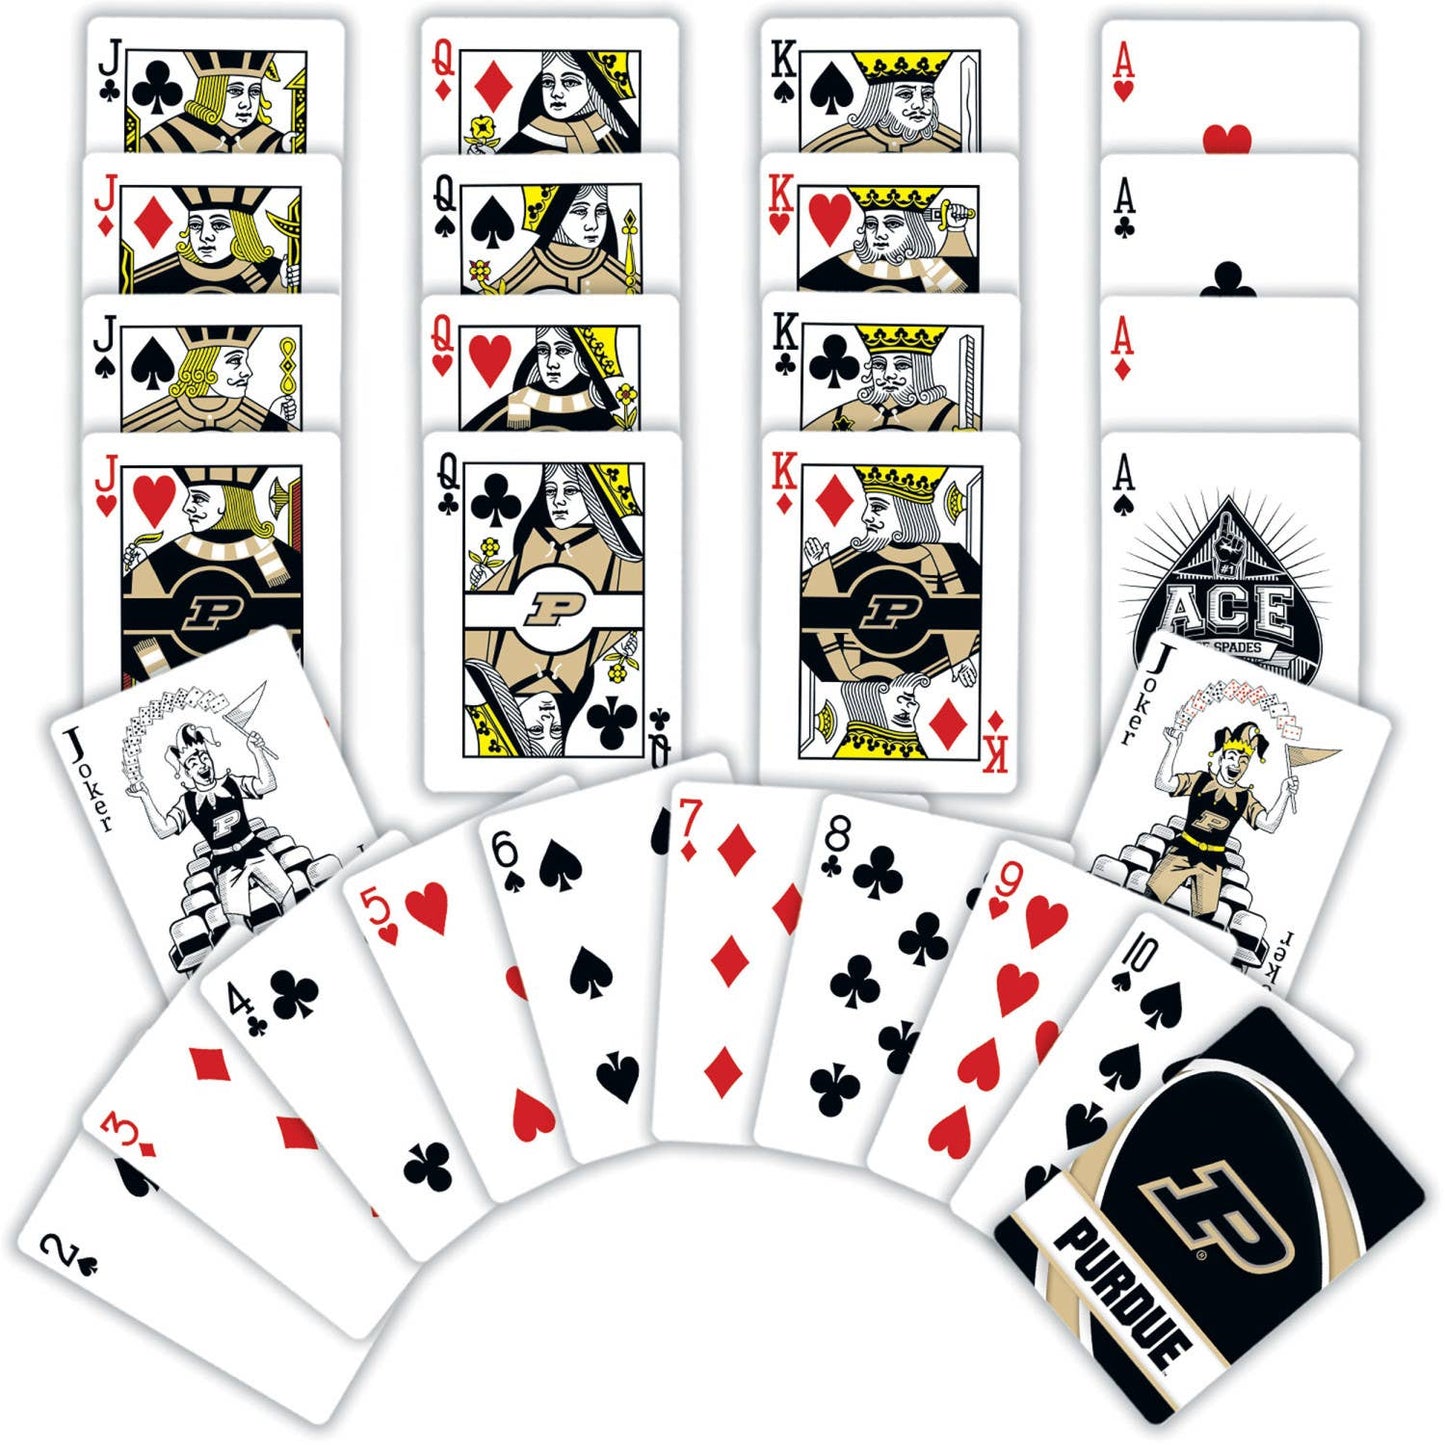 Purdue Boilermakers Playing Cards